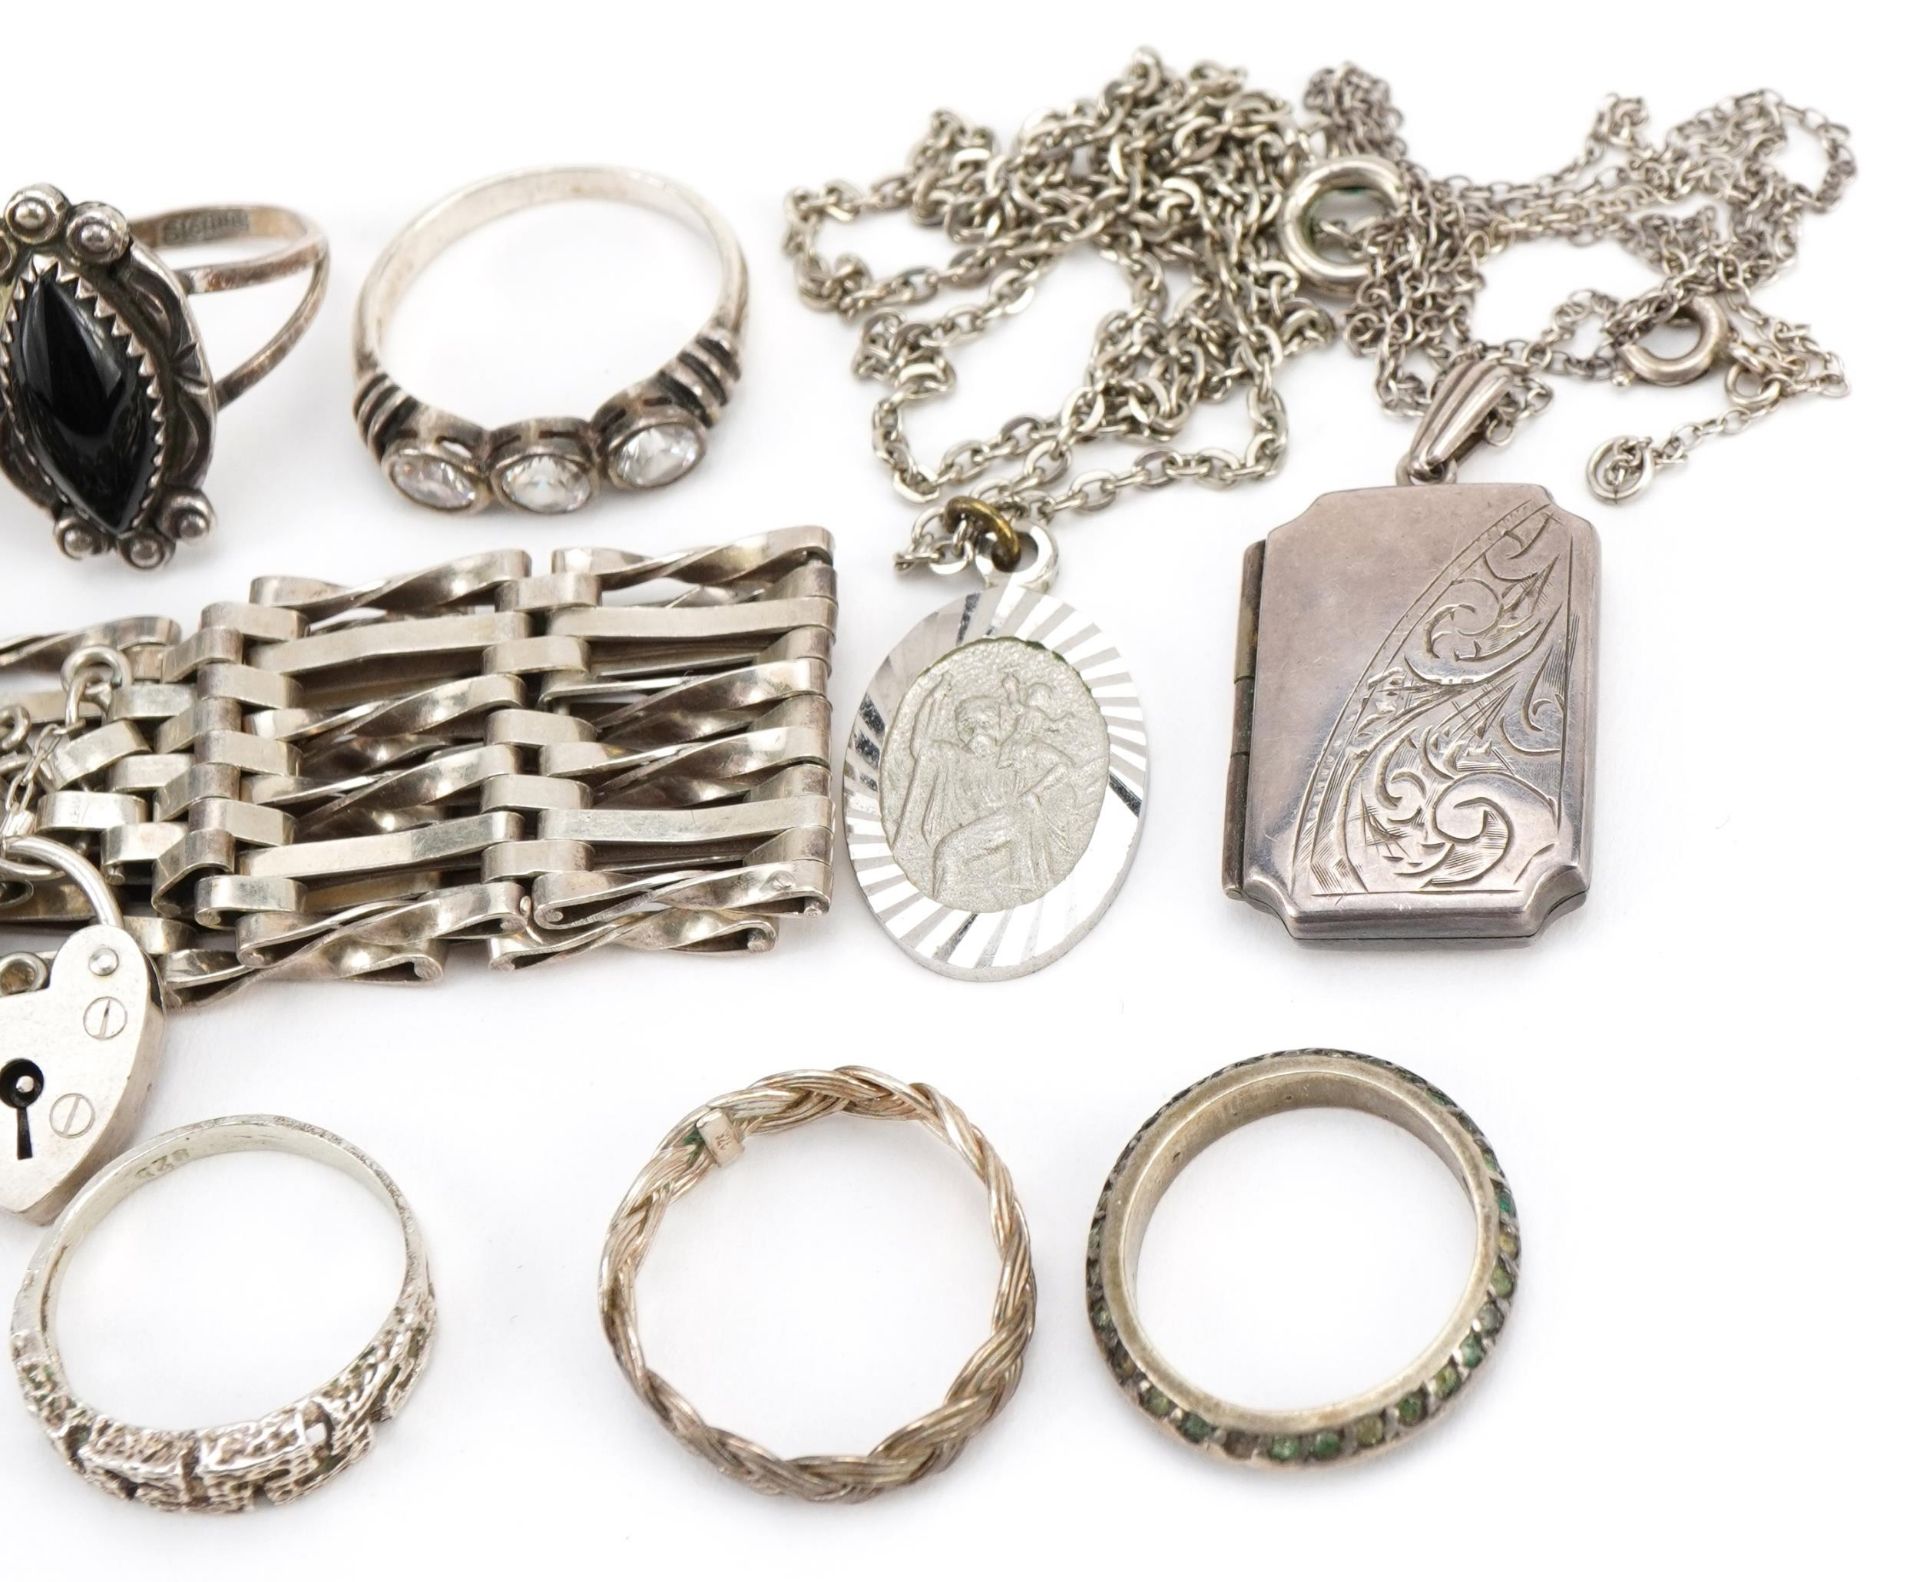 Silver and white metal jewellery including rings, gate link bracelet and rectangular locket with - Bild 3 aus 4